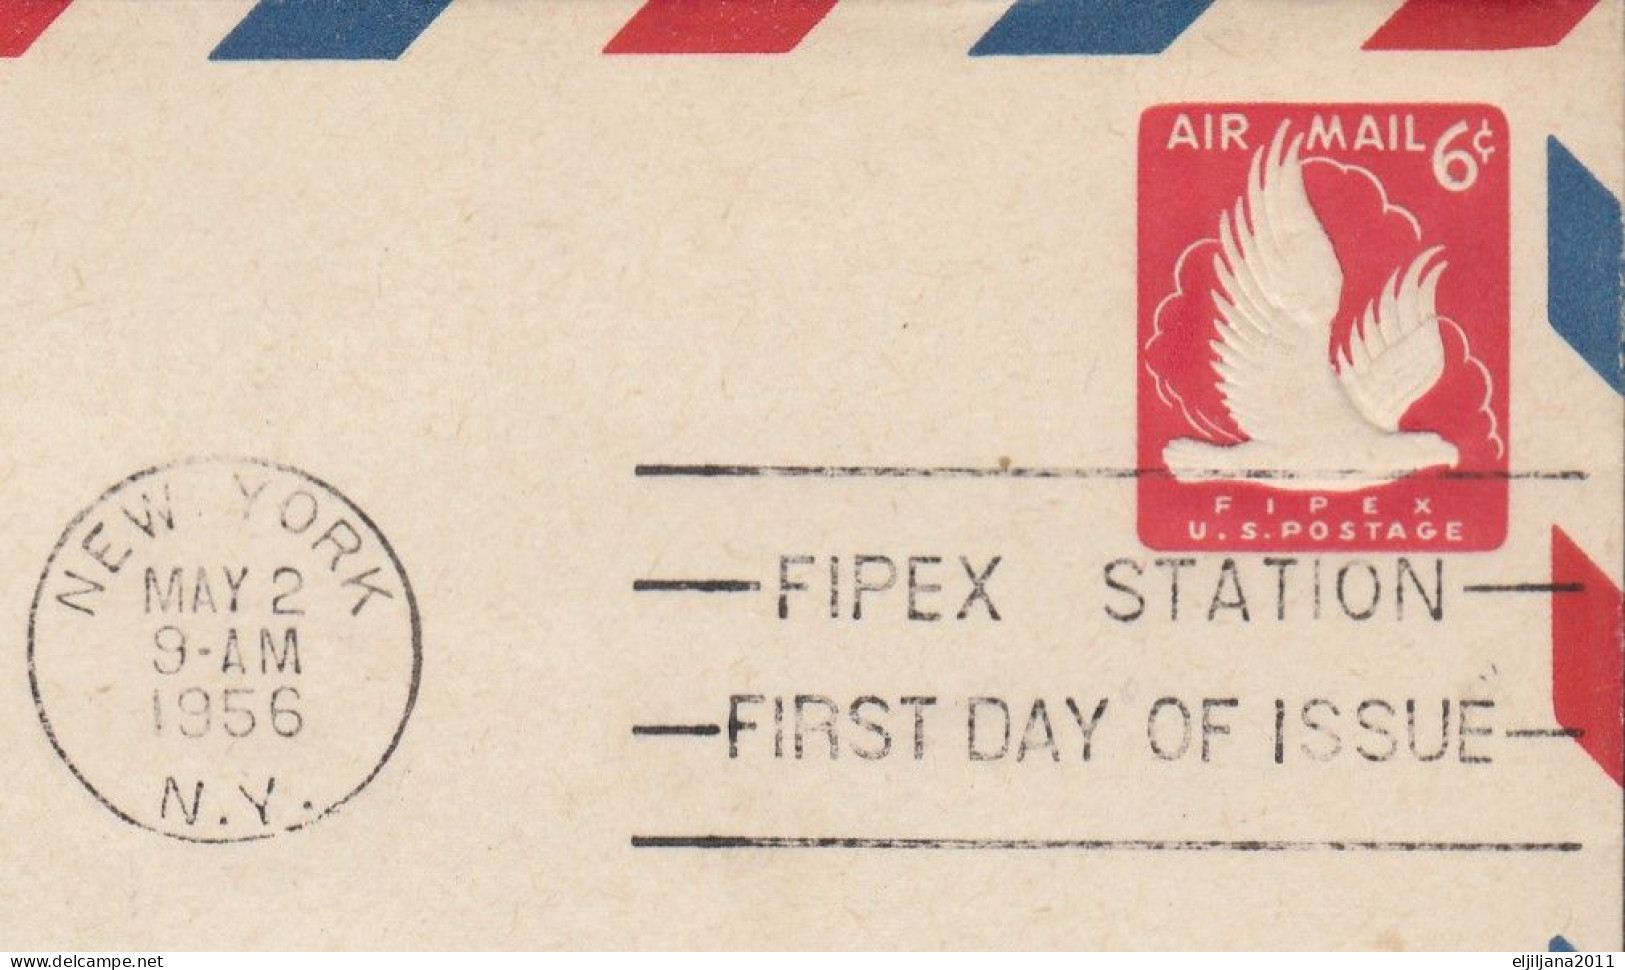 Action !! SALE !! 50 % OFF !! ⁕ USA 1956 ⁕ Air Mail 6c Eagle Fipex Station ⁕ FDC Stationery Cover / NEW YORK - 1951-1960